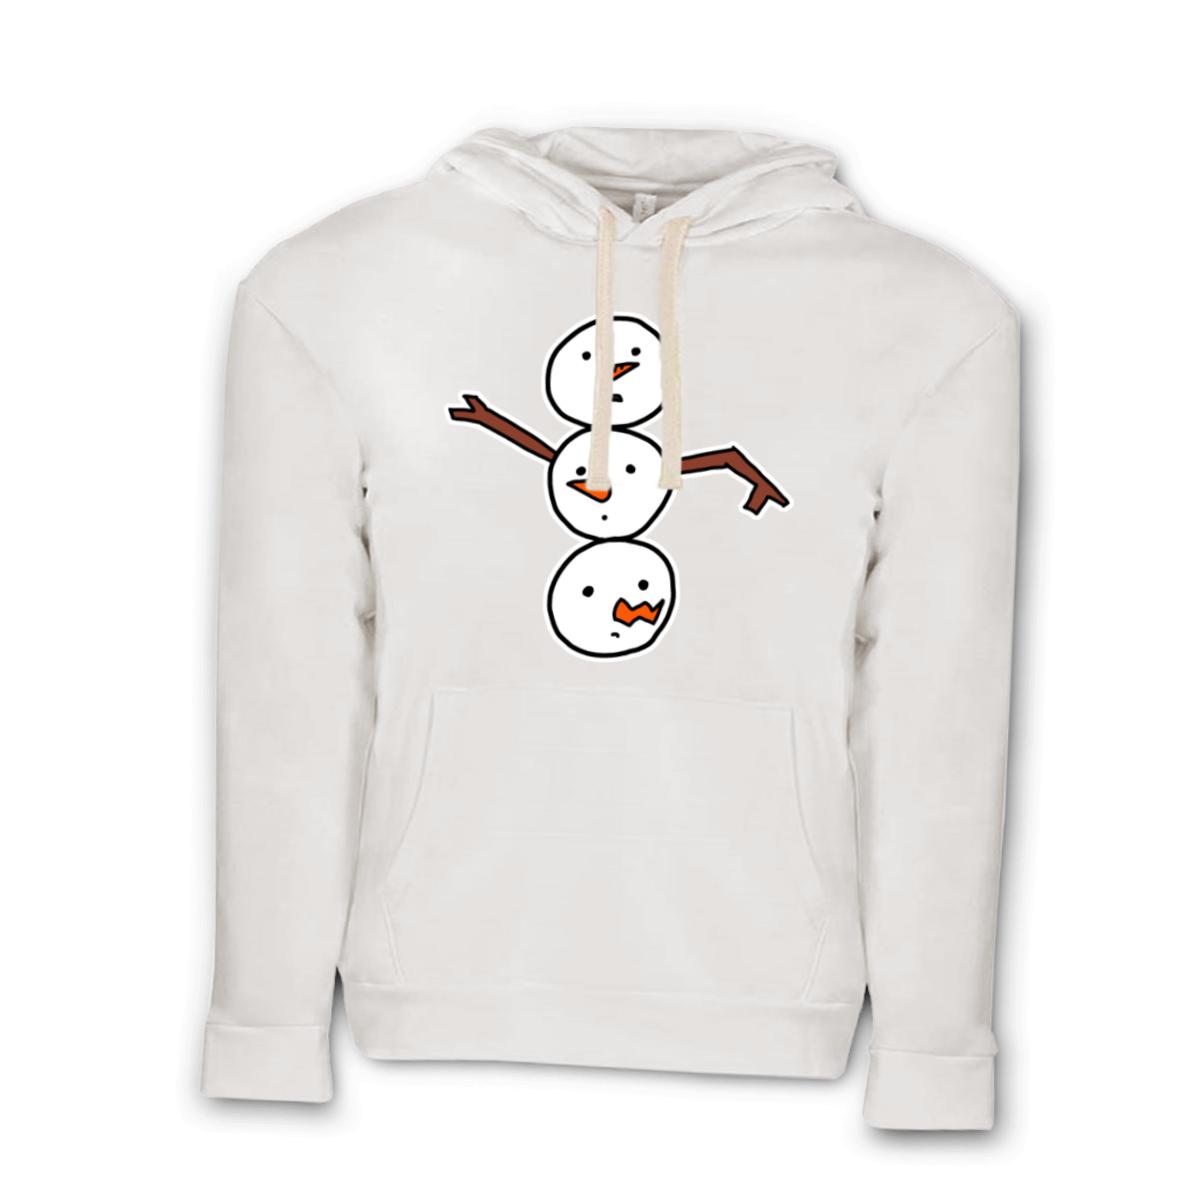 Snowman All Heads Unisex Pullover Hoodie Small white